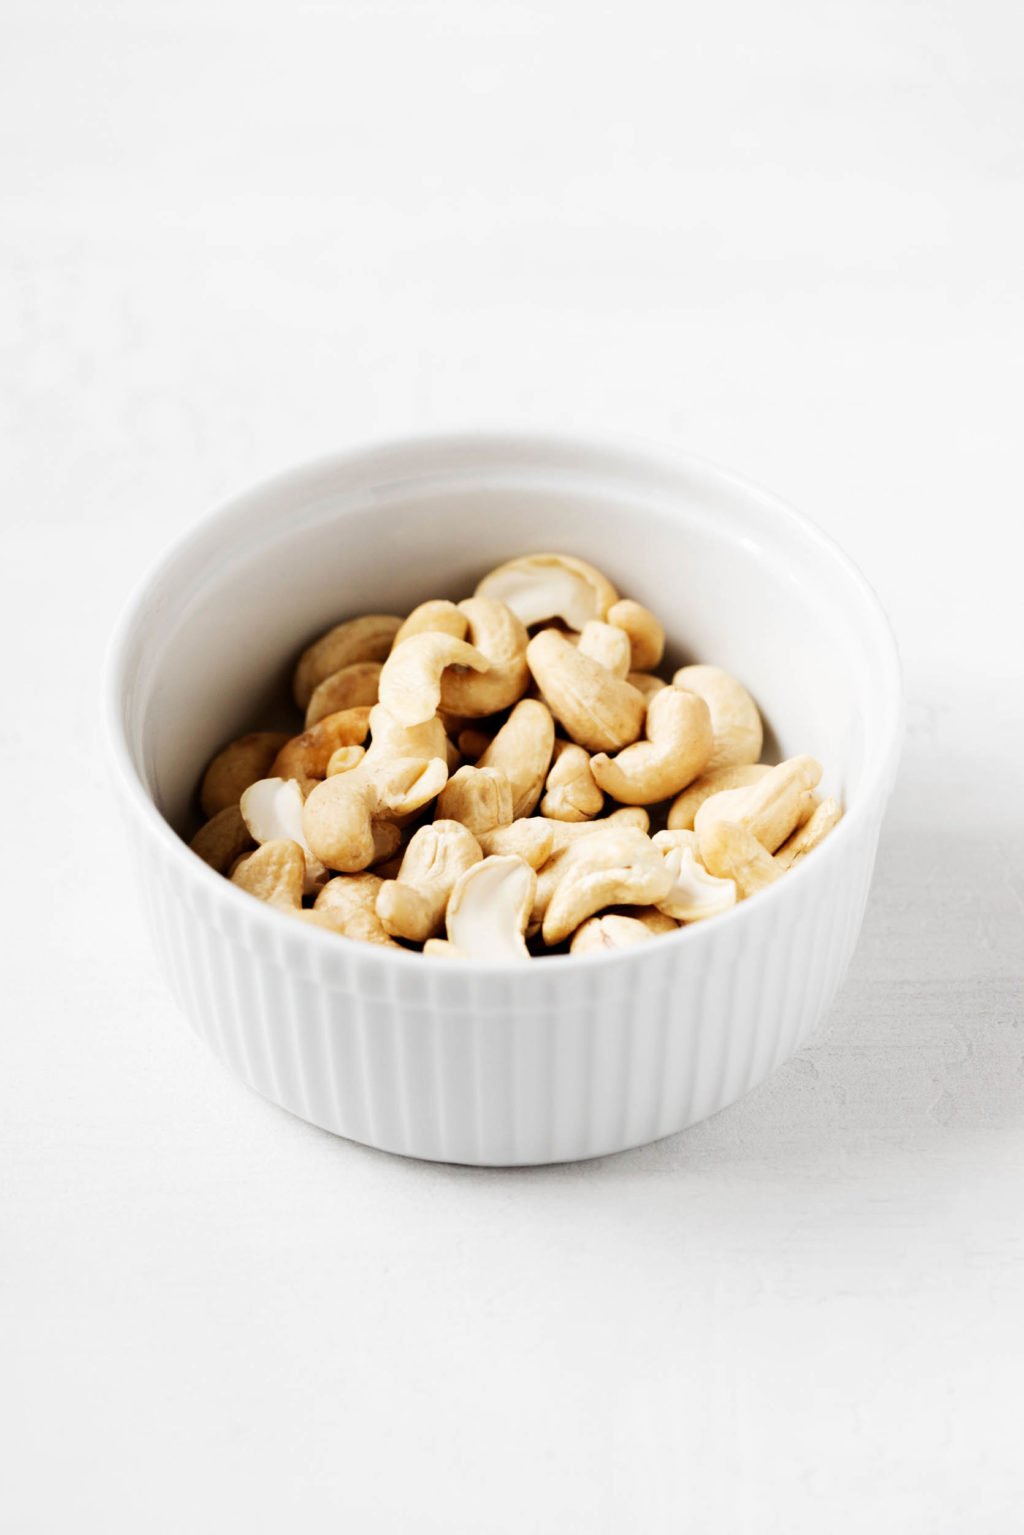 A small, white ramekin is filled with raw cashews.